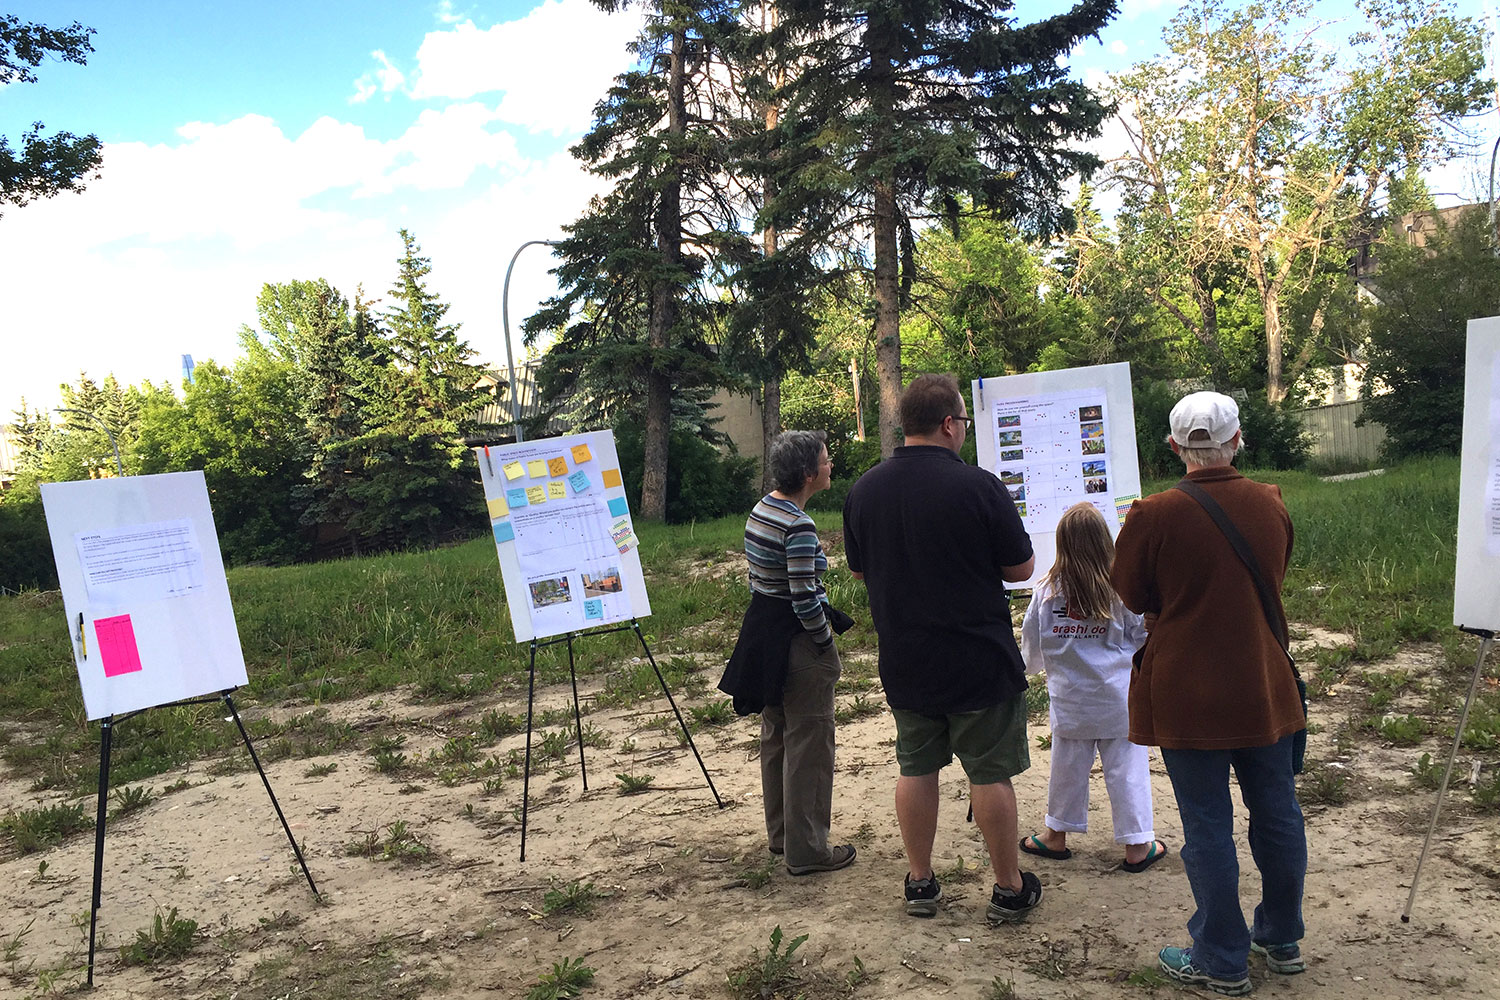 Bankview residents shared their thoughts at a public open house for the Higgy’s Bluff temporary park project on June 15.
Courtesy Chad Peters